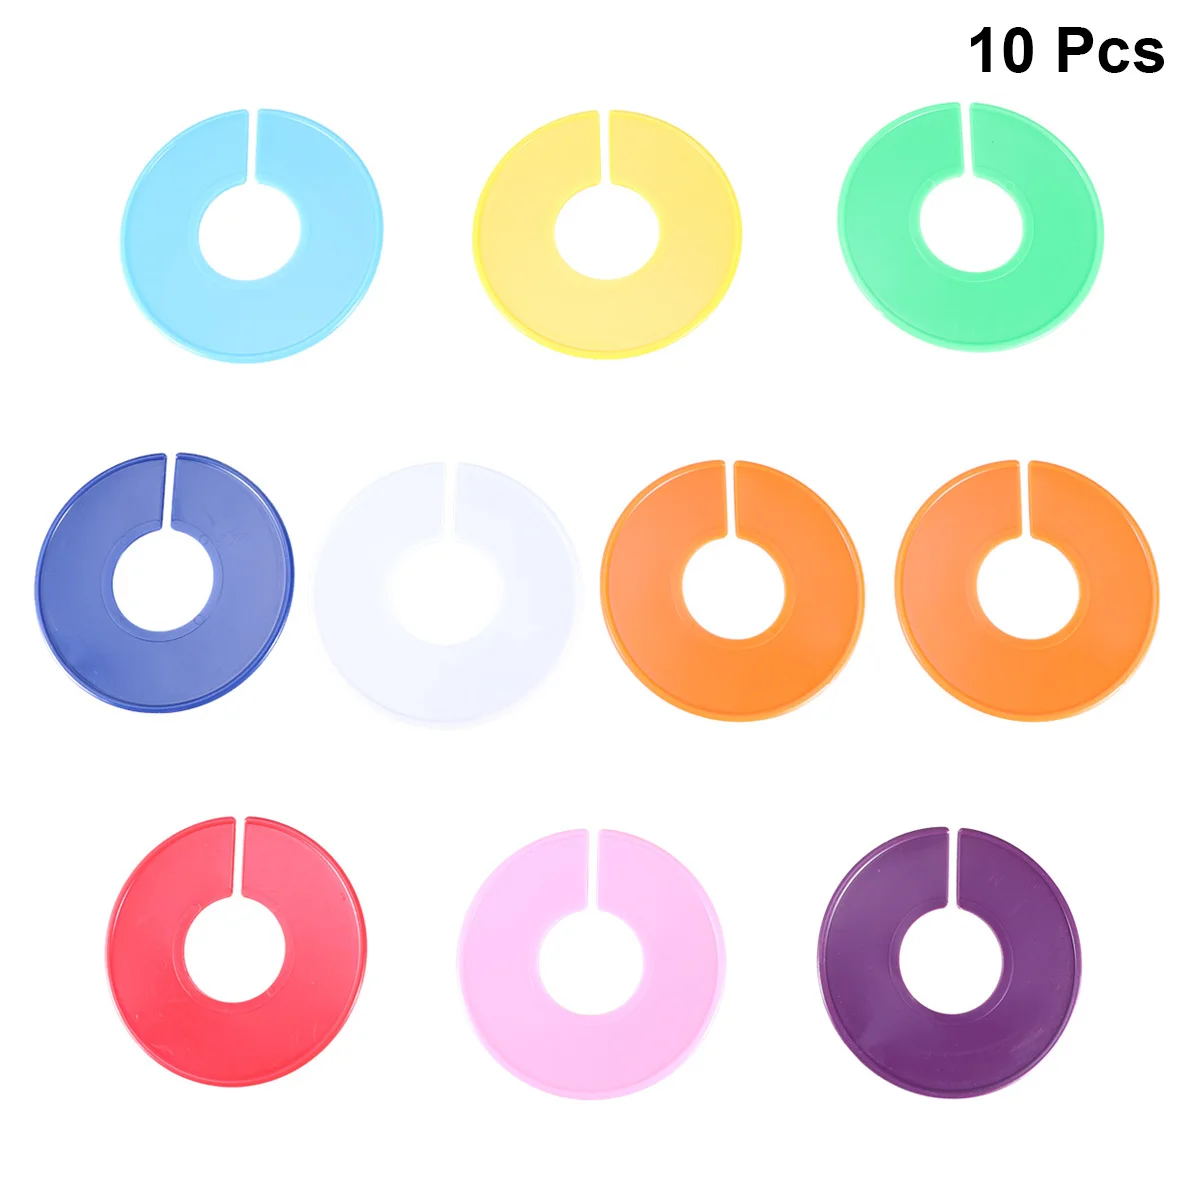 

10 Pcs Colored Tabs DIY Closet Dividers Round Clothes Size Buckles Labels Clothing Rack Racks Hangers Plastic Tags